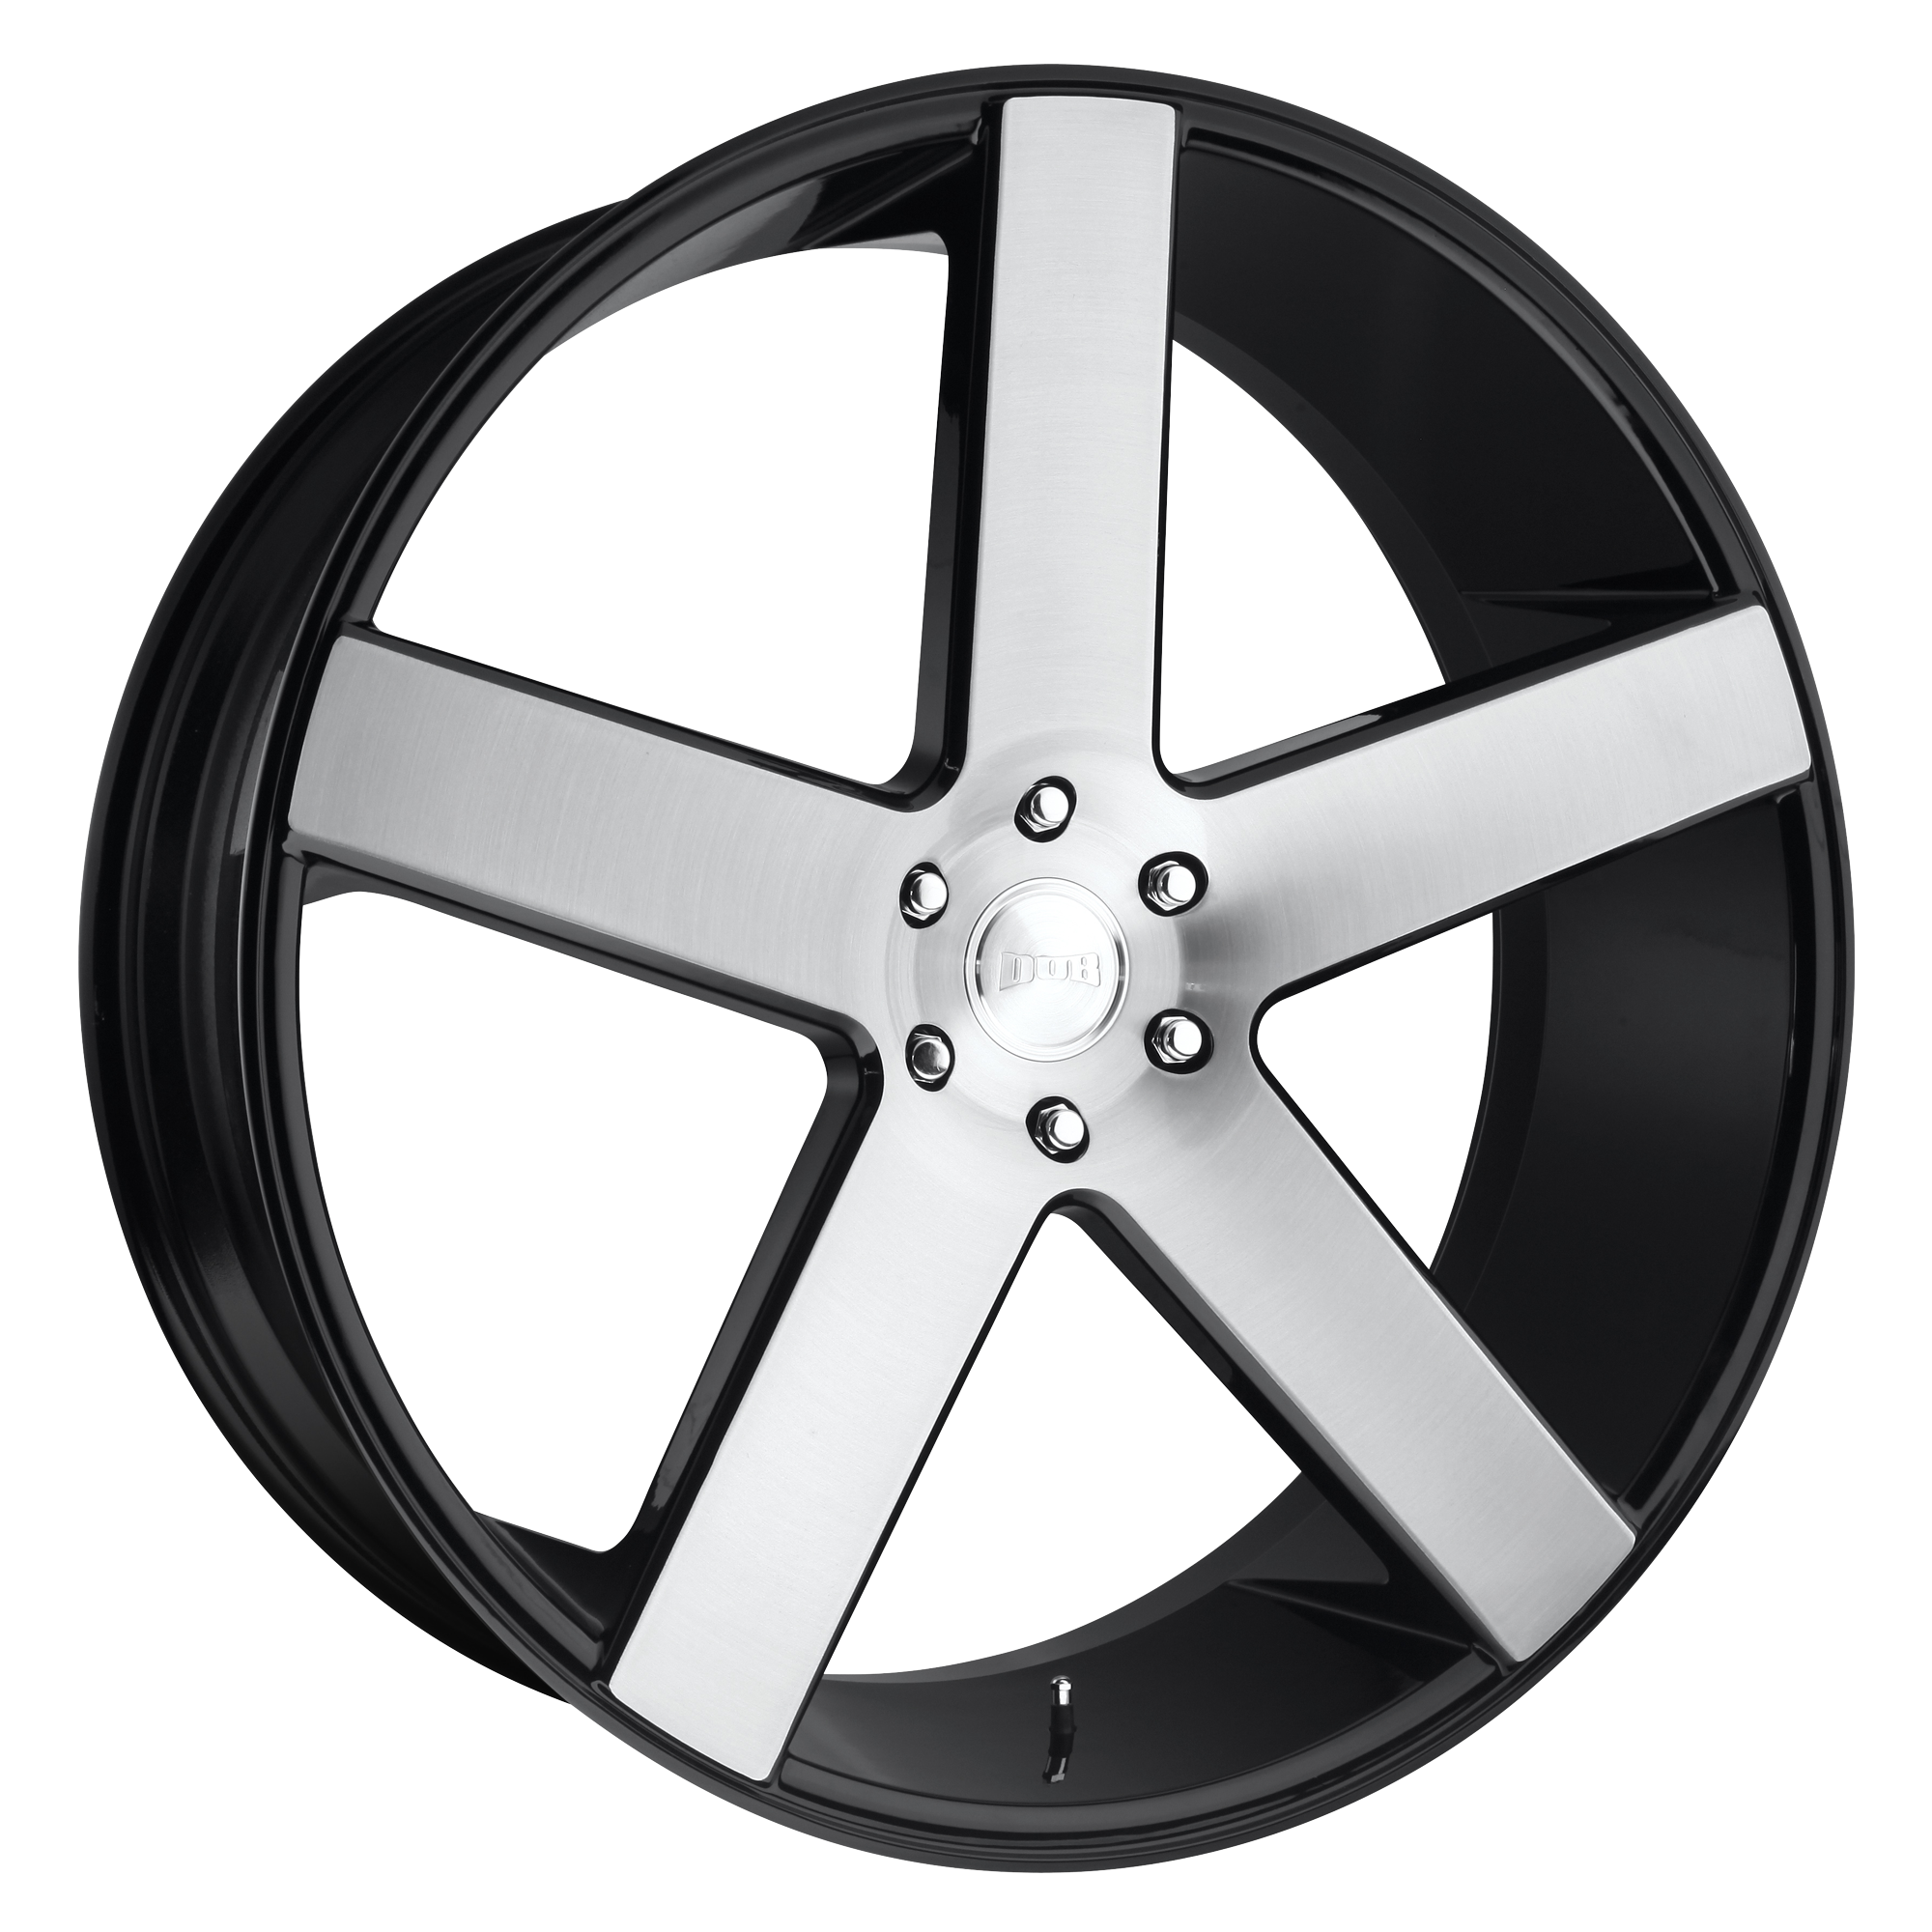 BALLER 22x9.5 6x139.70 GLOSS BLACK BRUSHED (31 mm) - Tires and Engine Performance